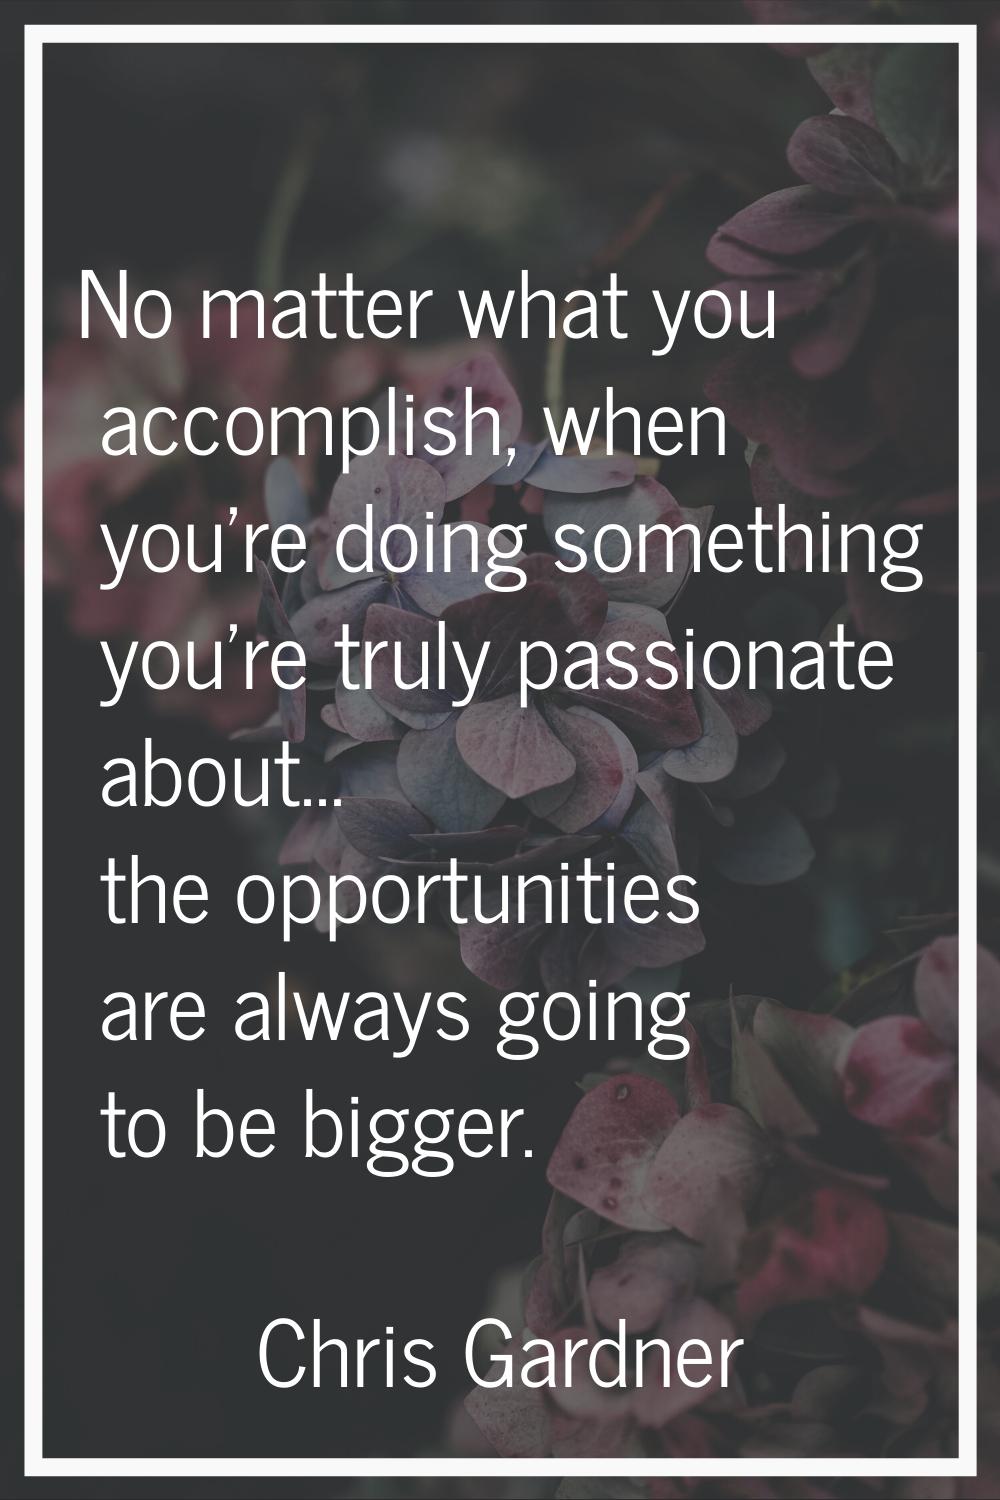 No matter what you accomplish, when you're doing something you're truly passionate about... the opp